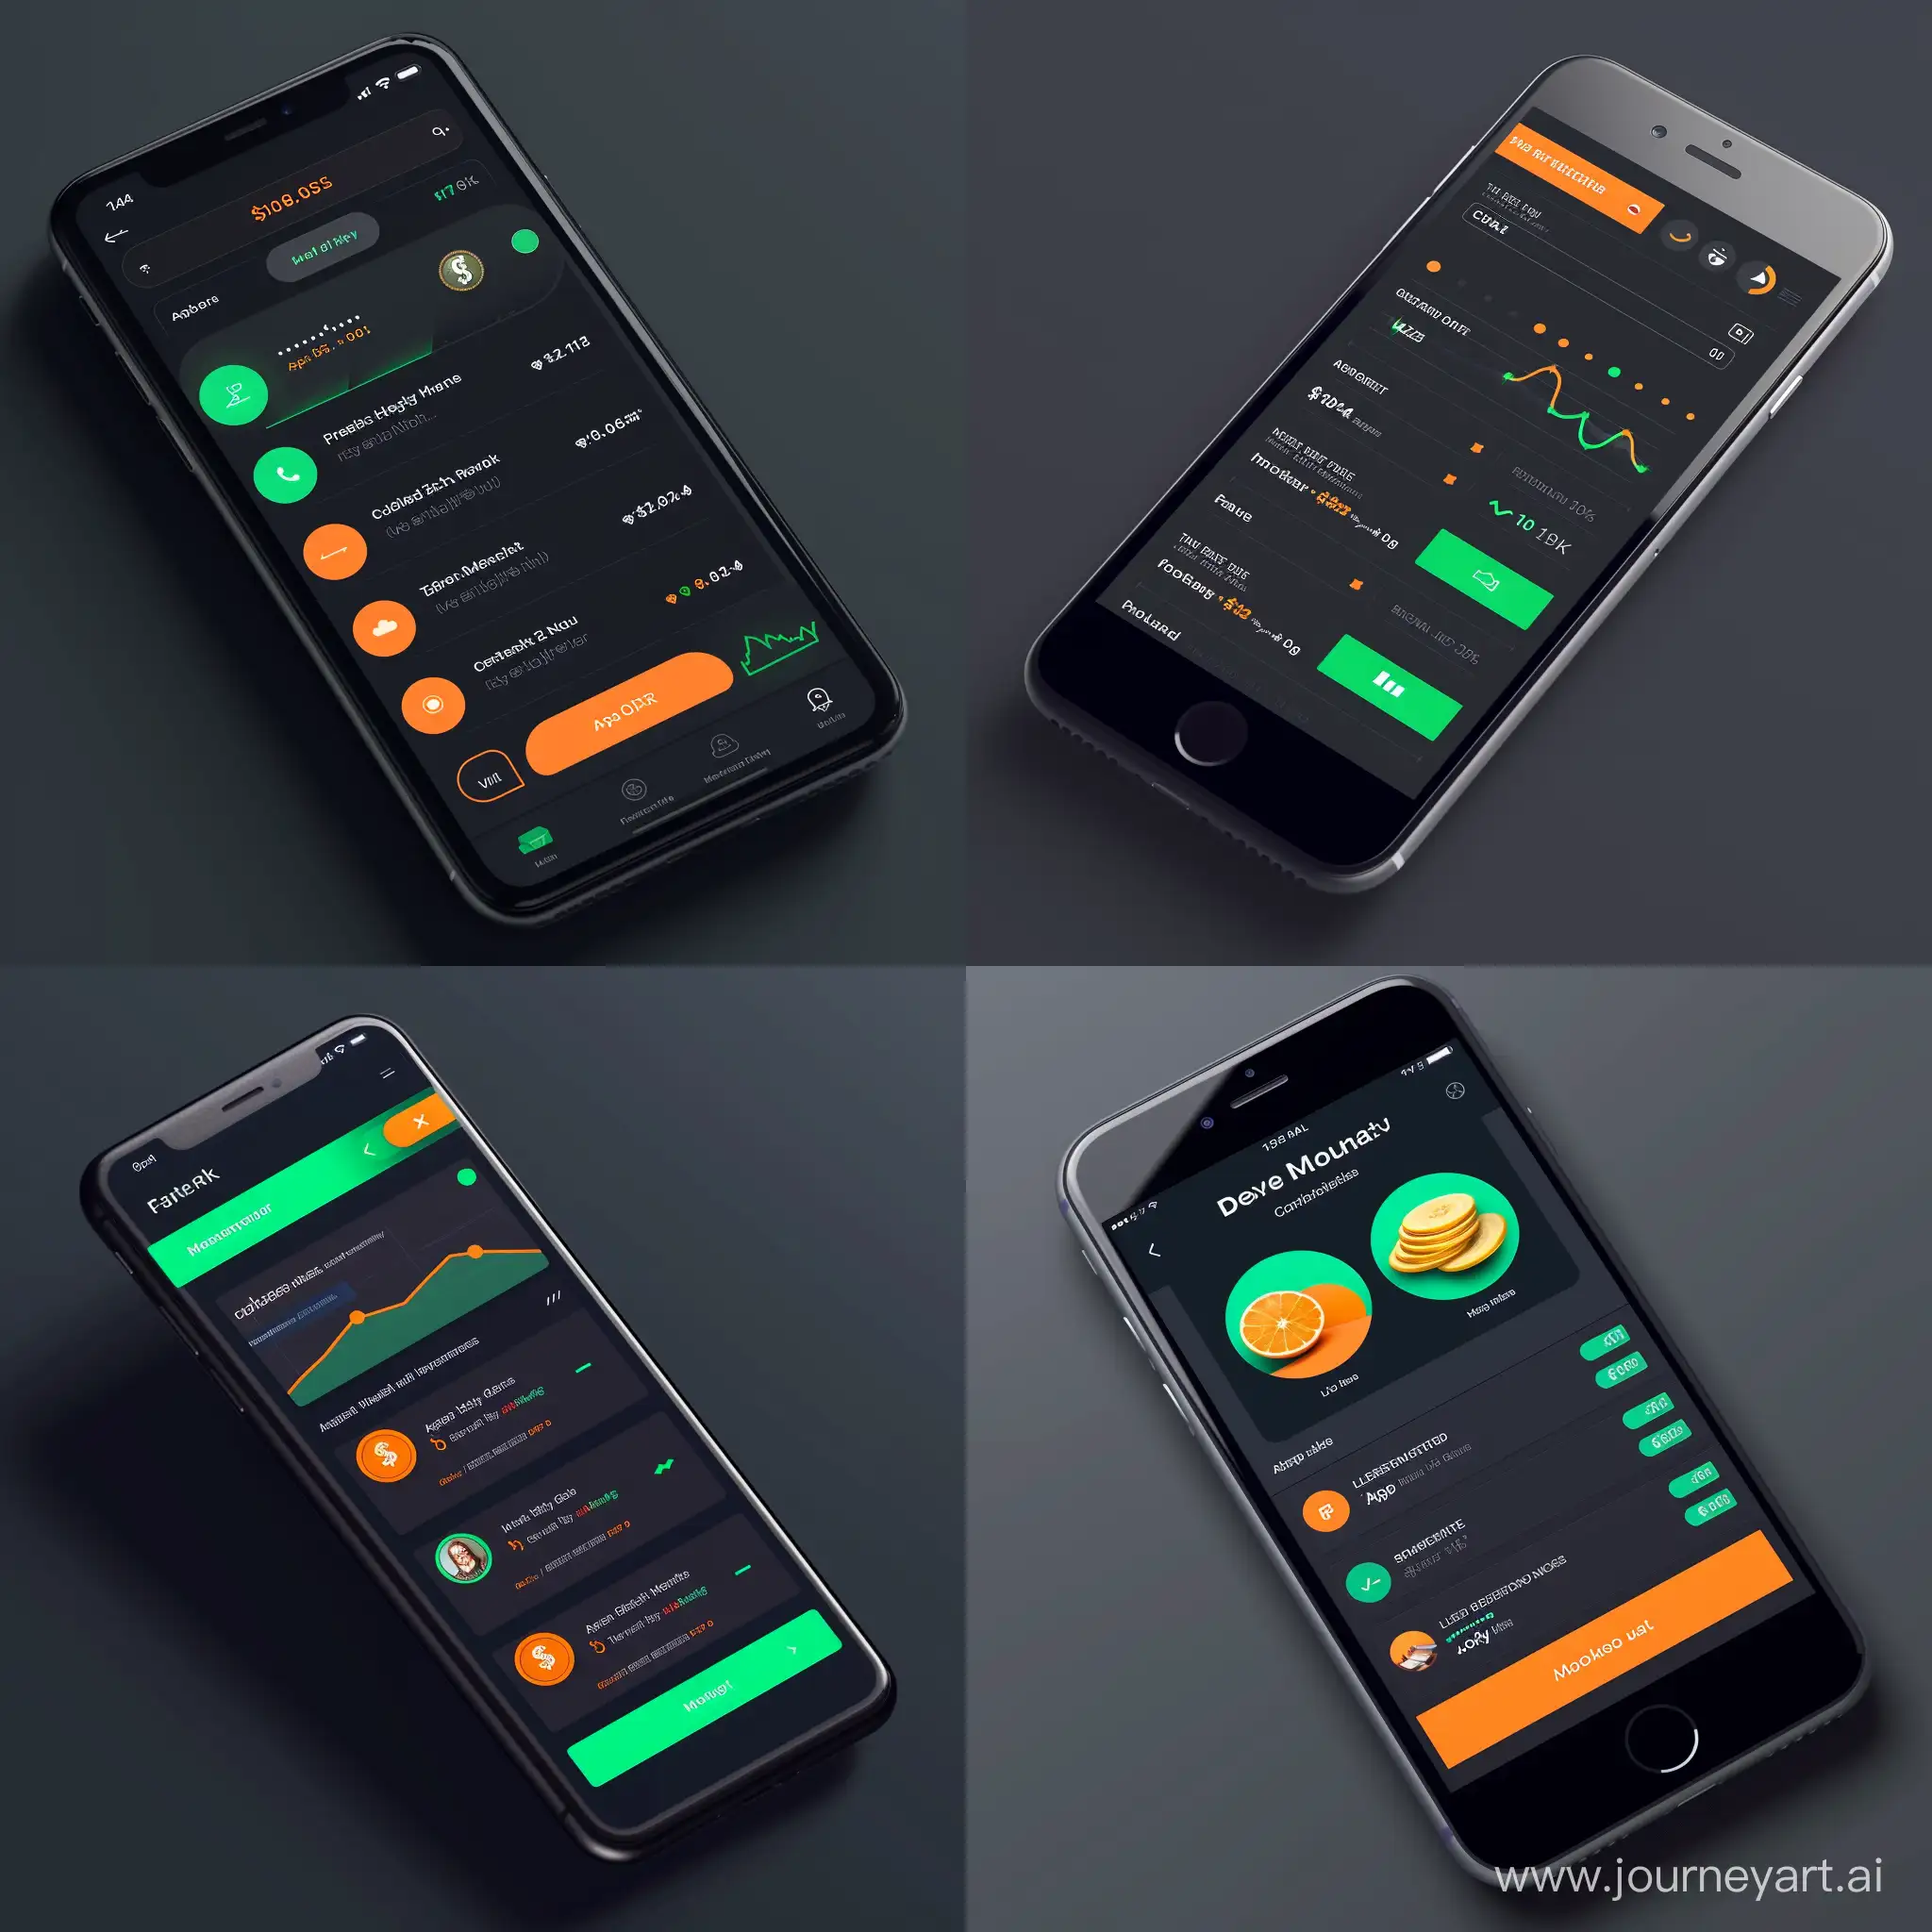 tech inspired ios app
main color : dark
main accent : green
accent 2 : orange

This app is focused on helping users stay motivated using money
